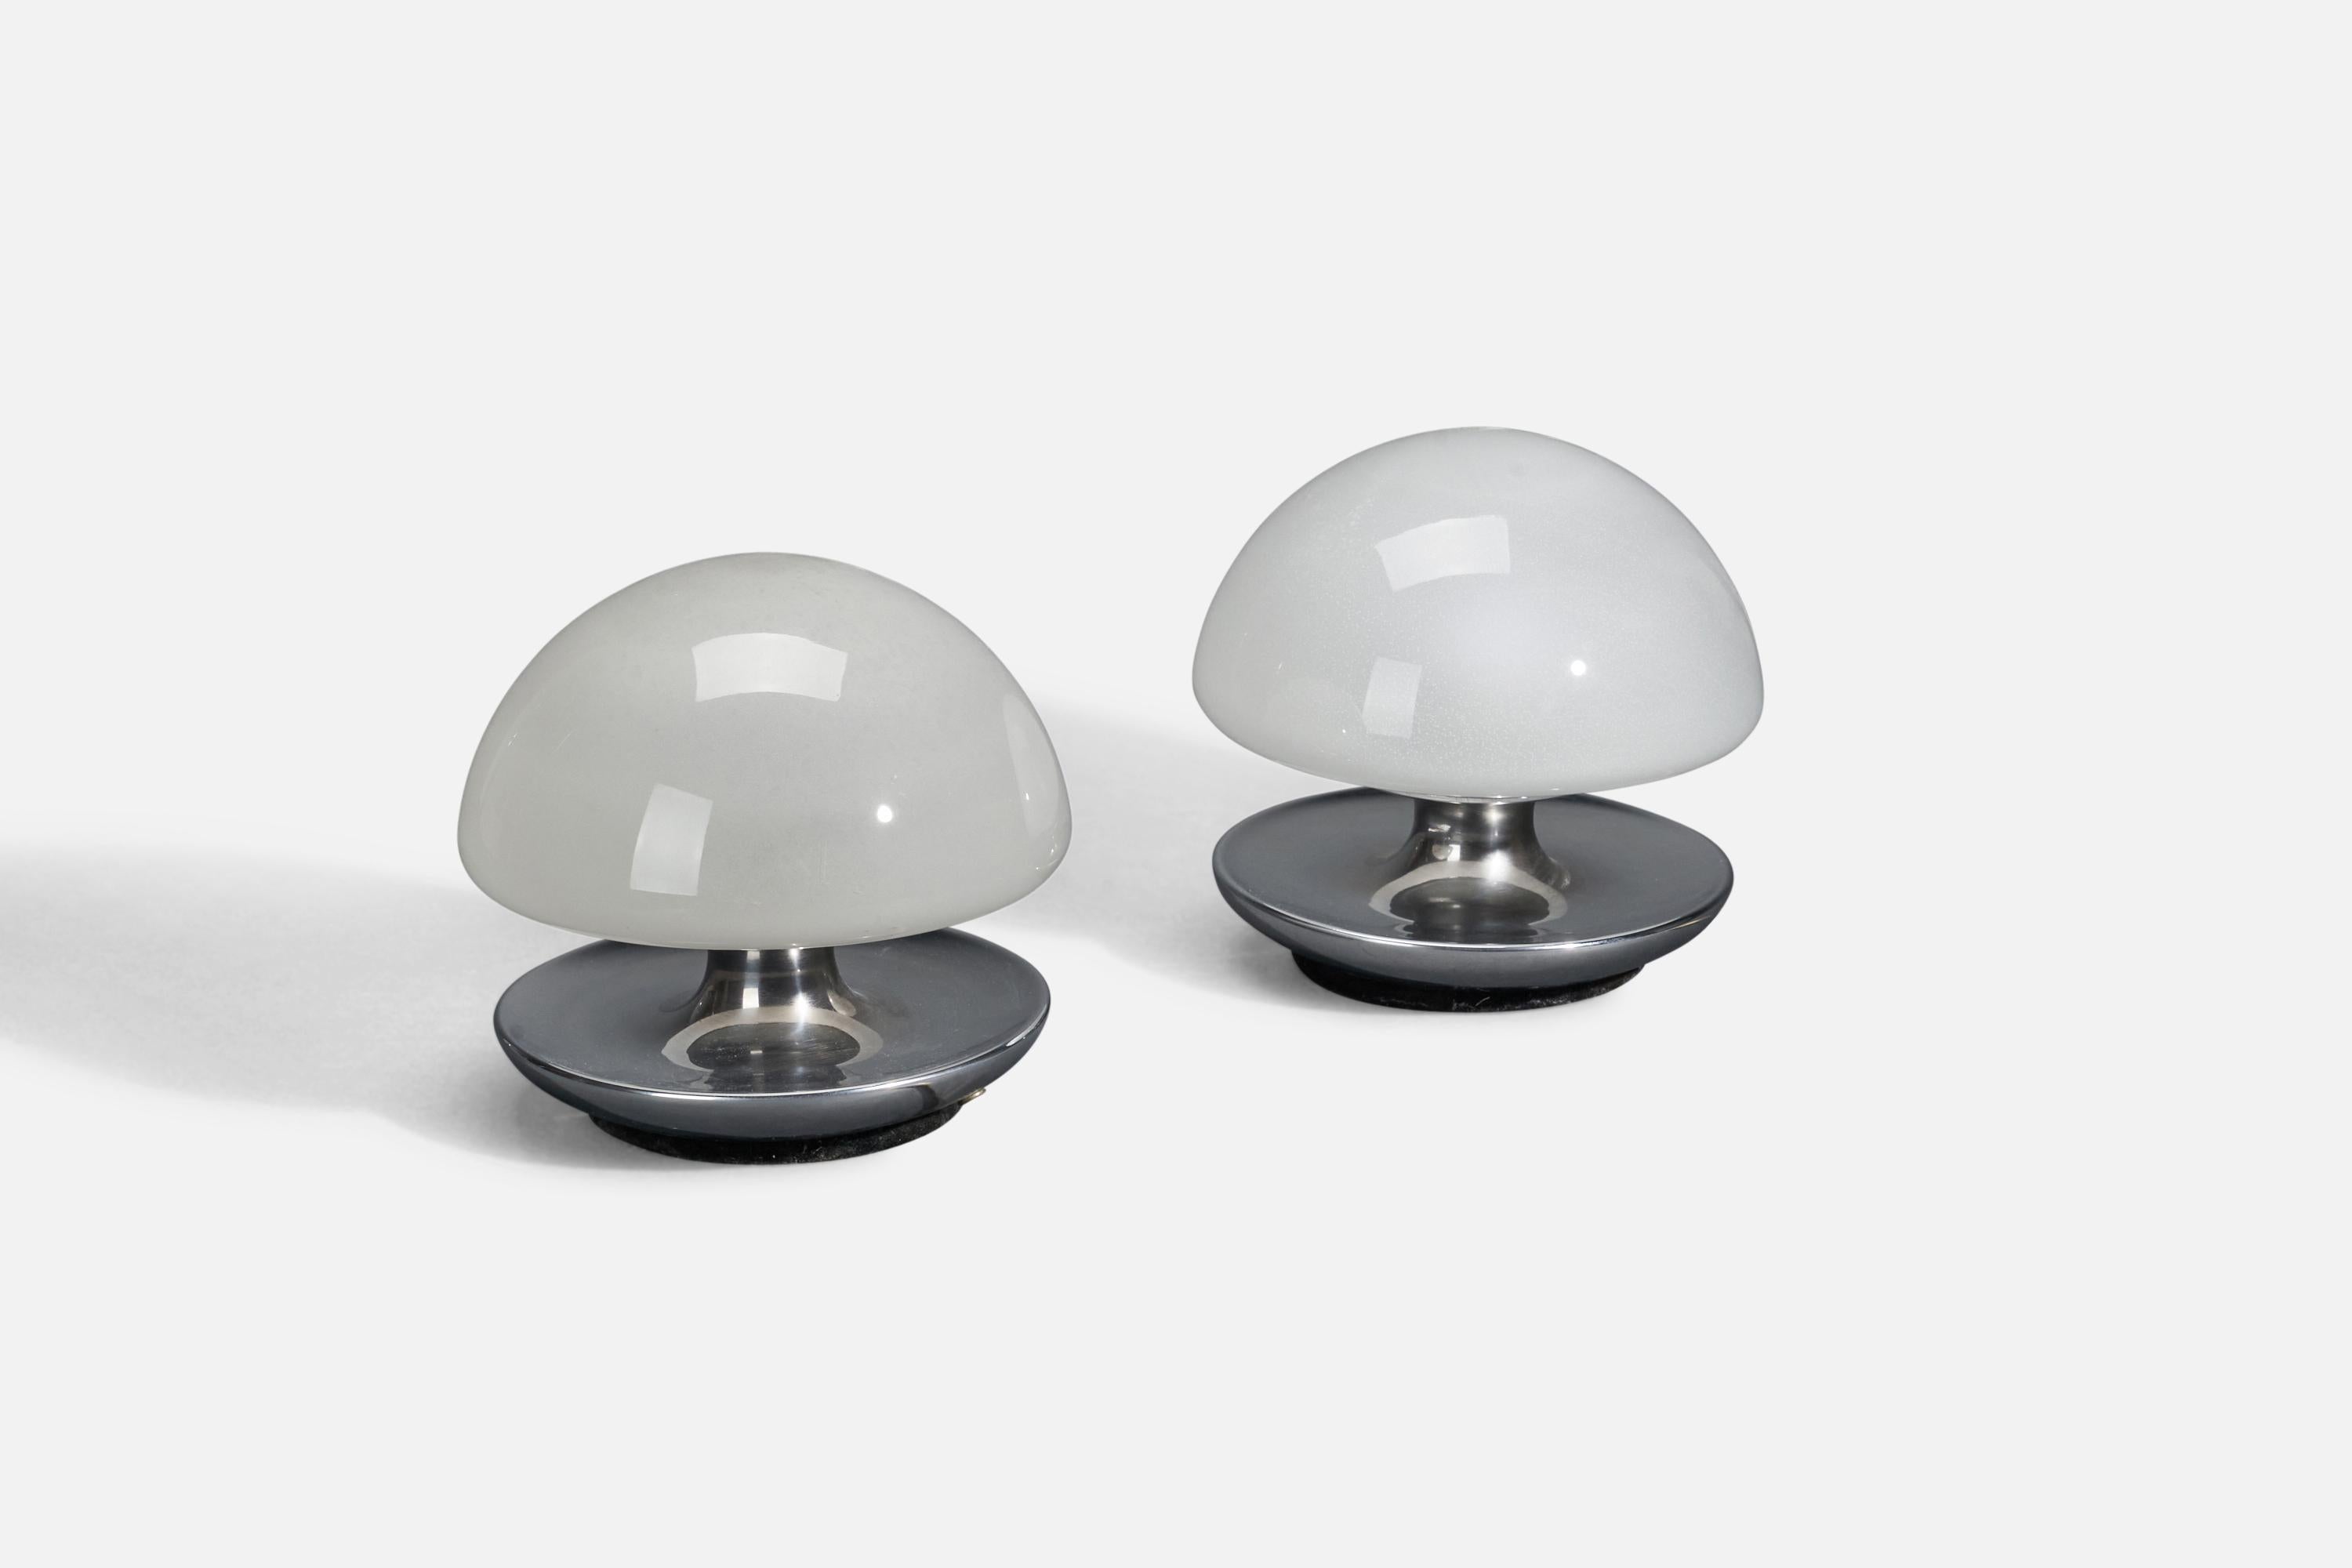 A pair of smoked glass & stainless steel table lamps designed and produced in Italy, 1970s.
